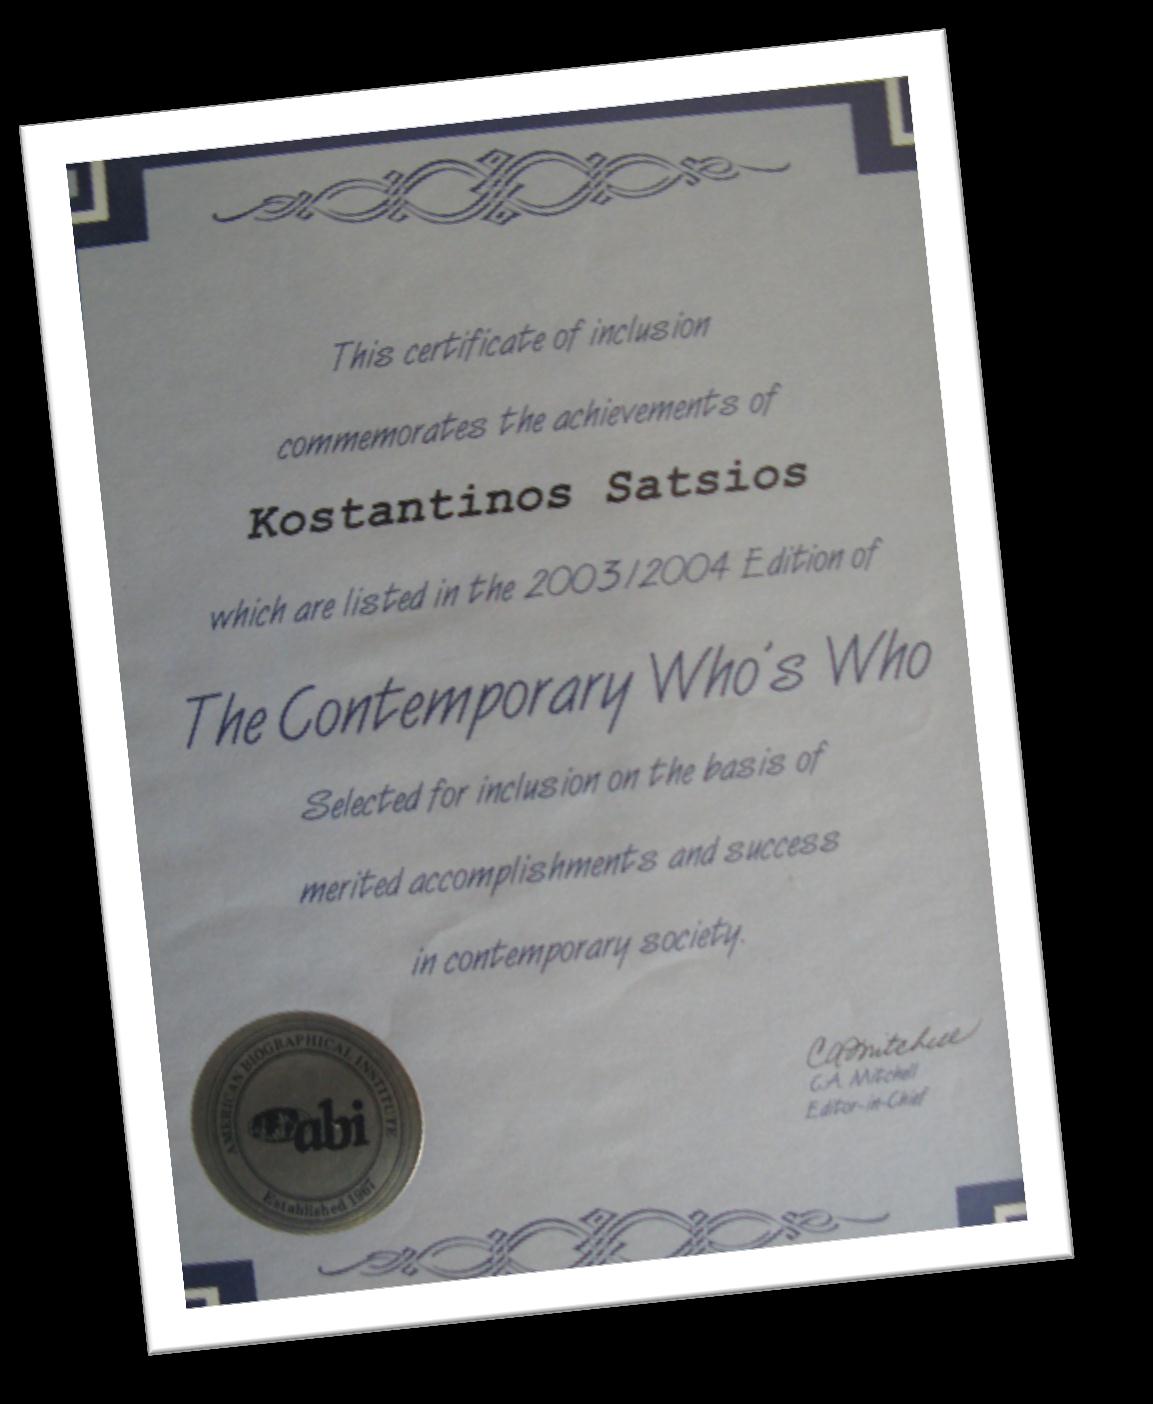 The Contemporary Who s Who (American Biographical Institute)